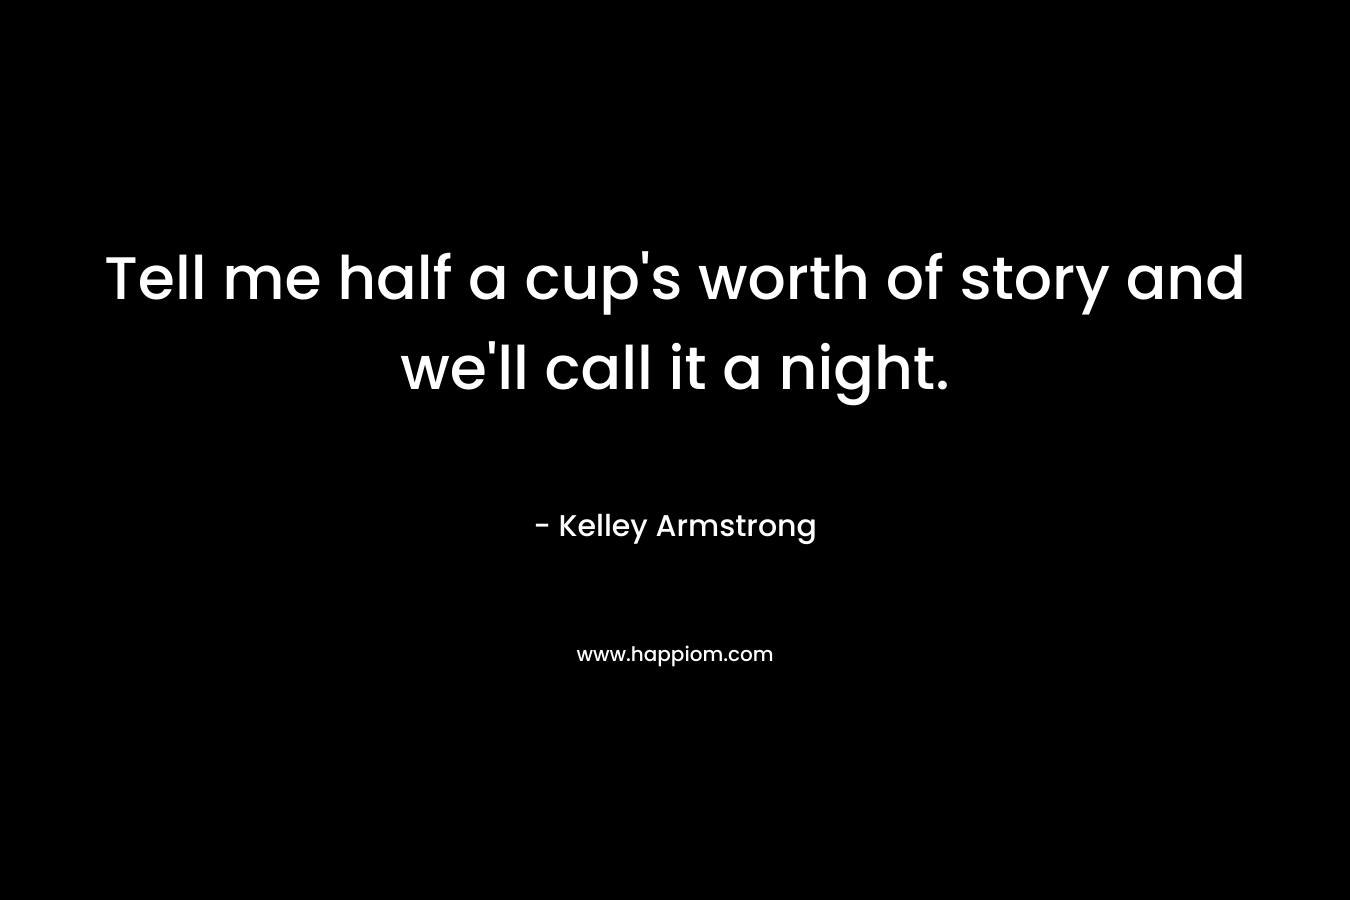 Tell me half a cup's worth of story and we'll call it a night.